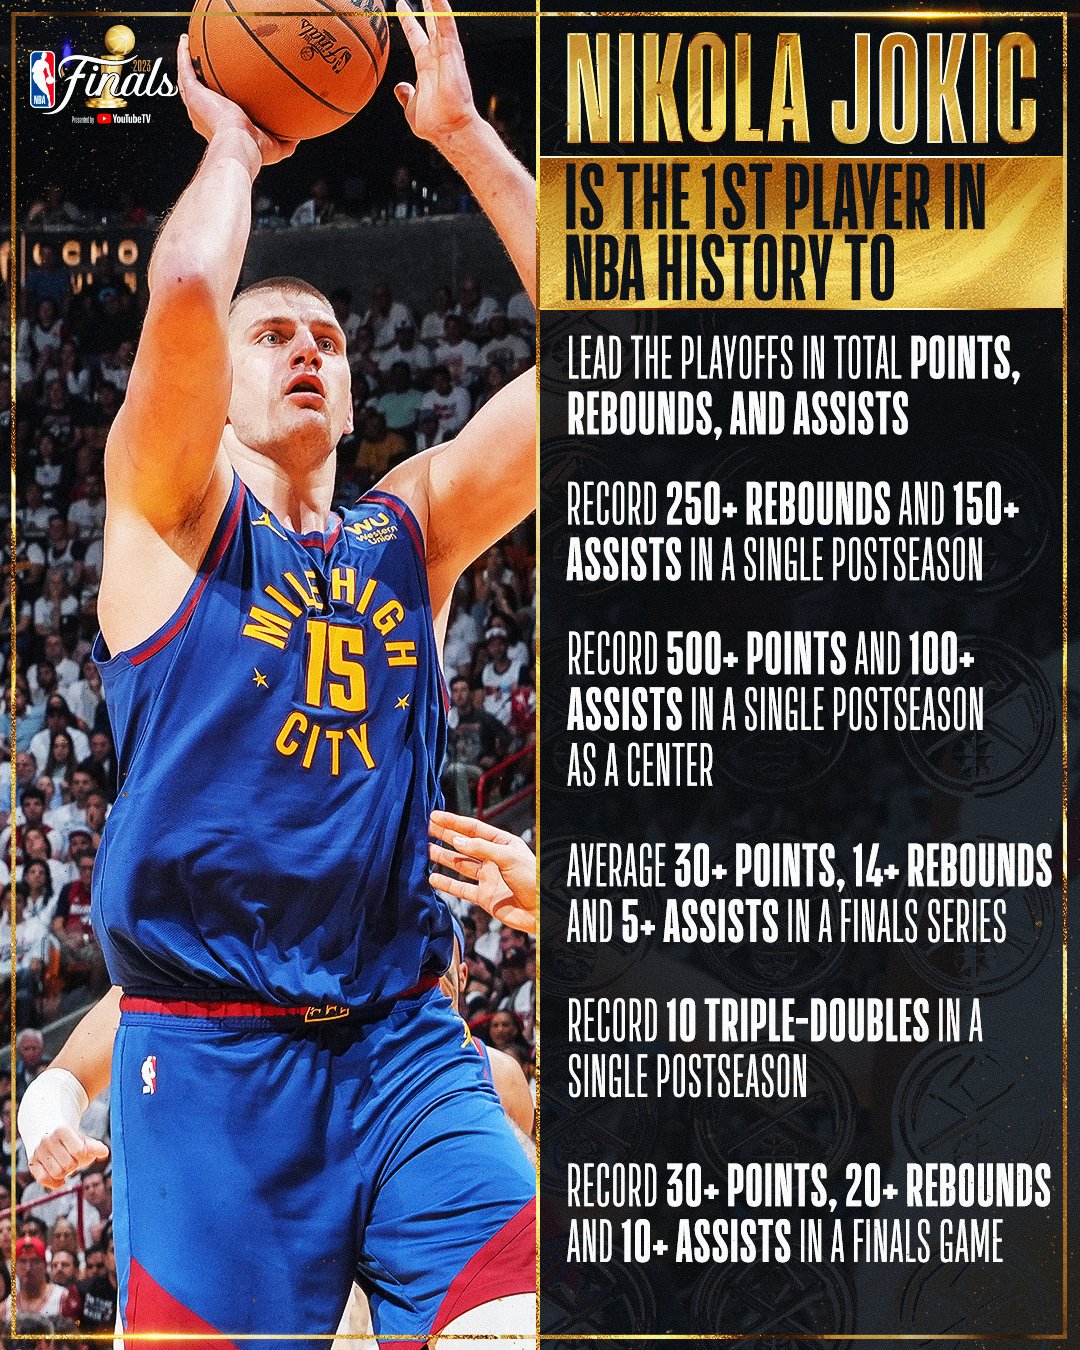 Nicola Jokic’s record in the playoffs